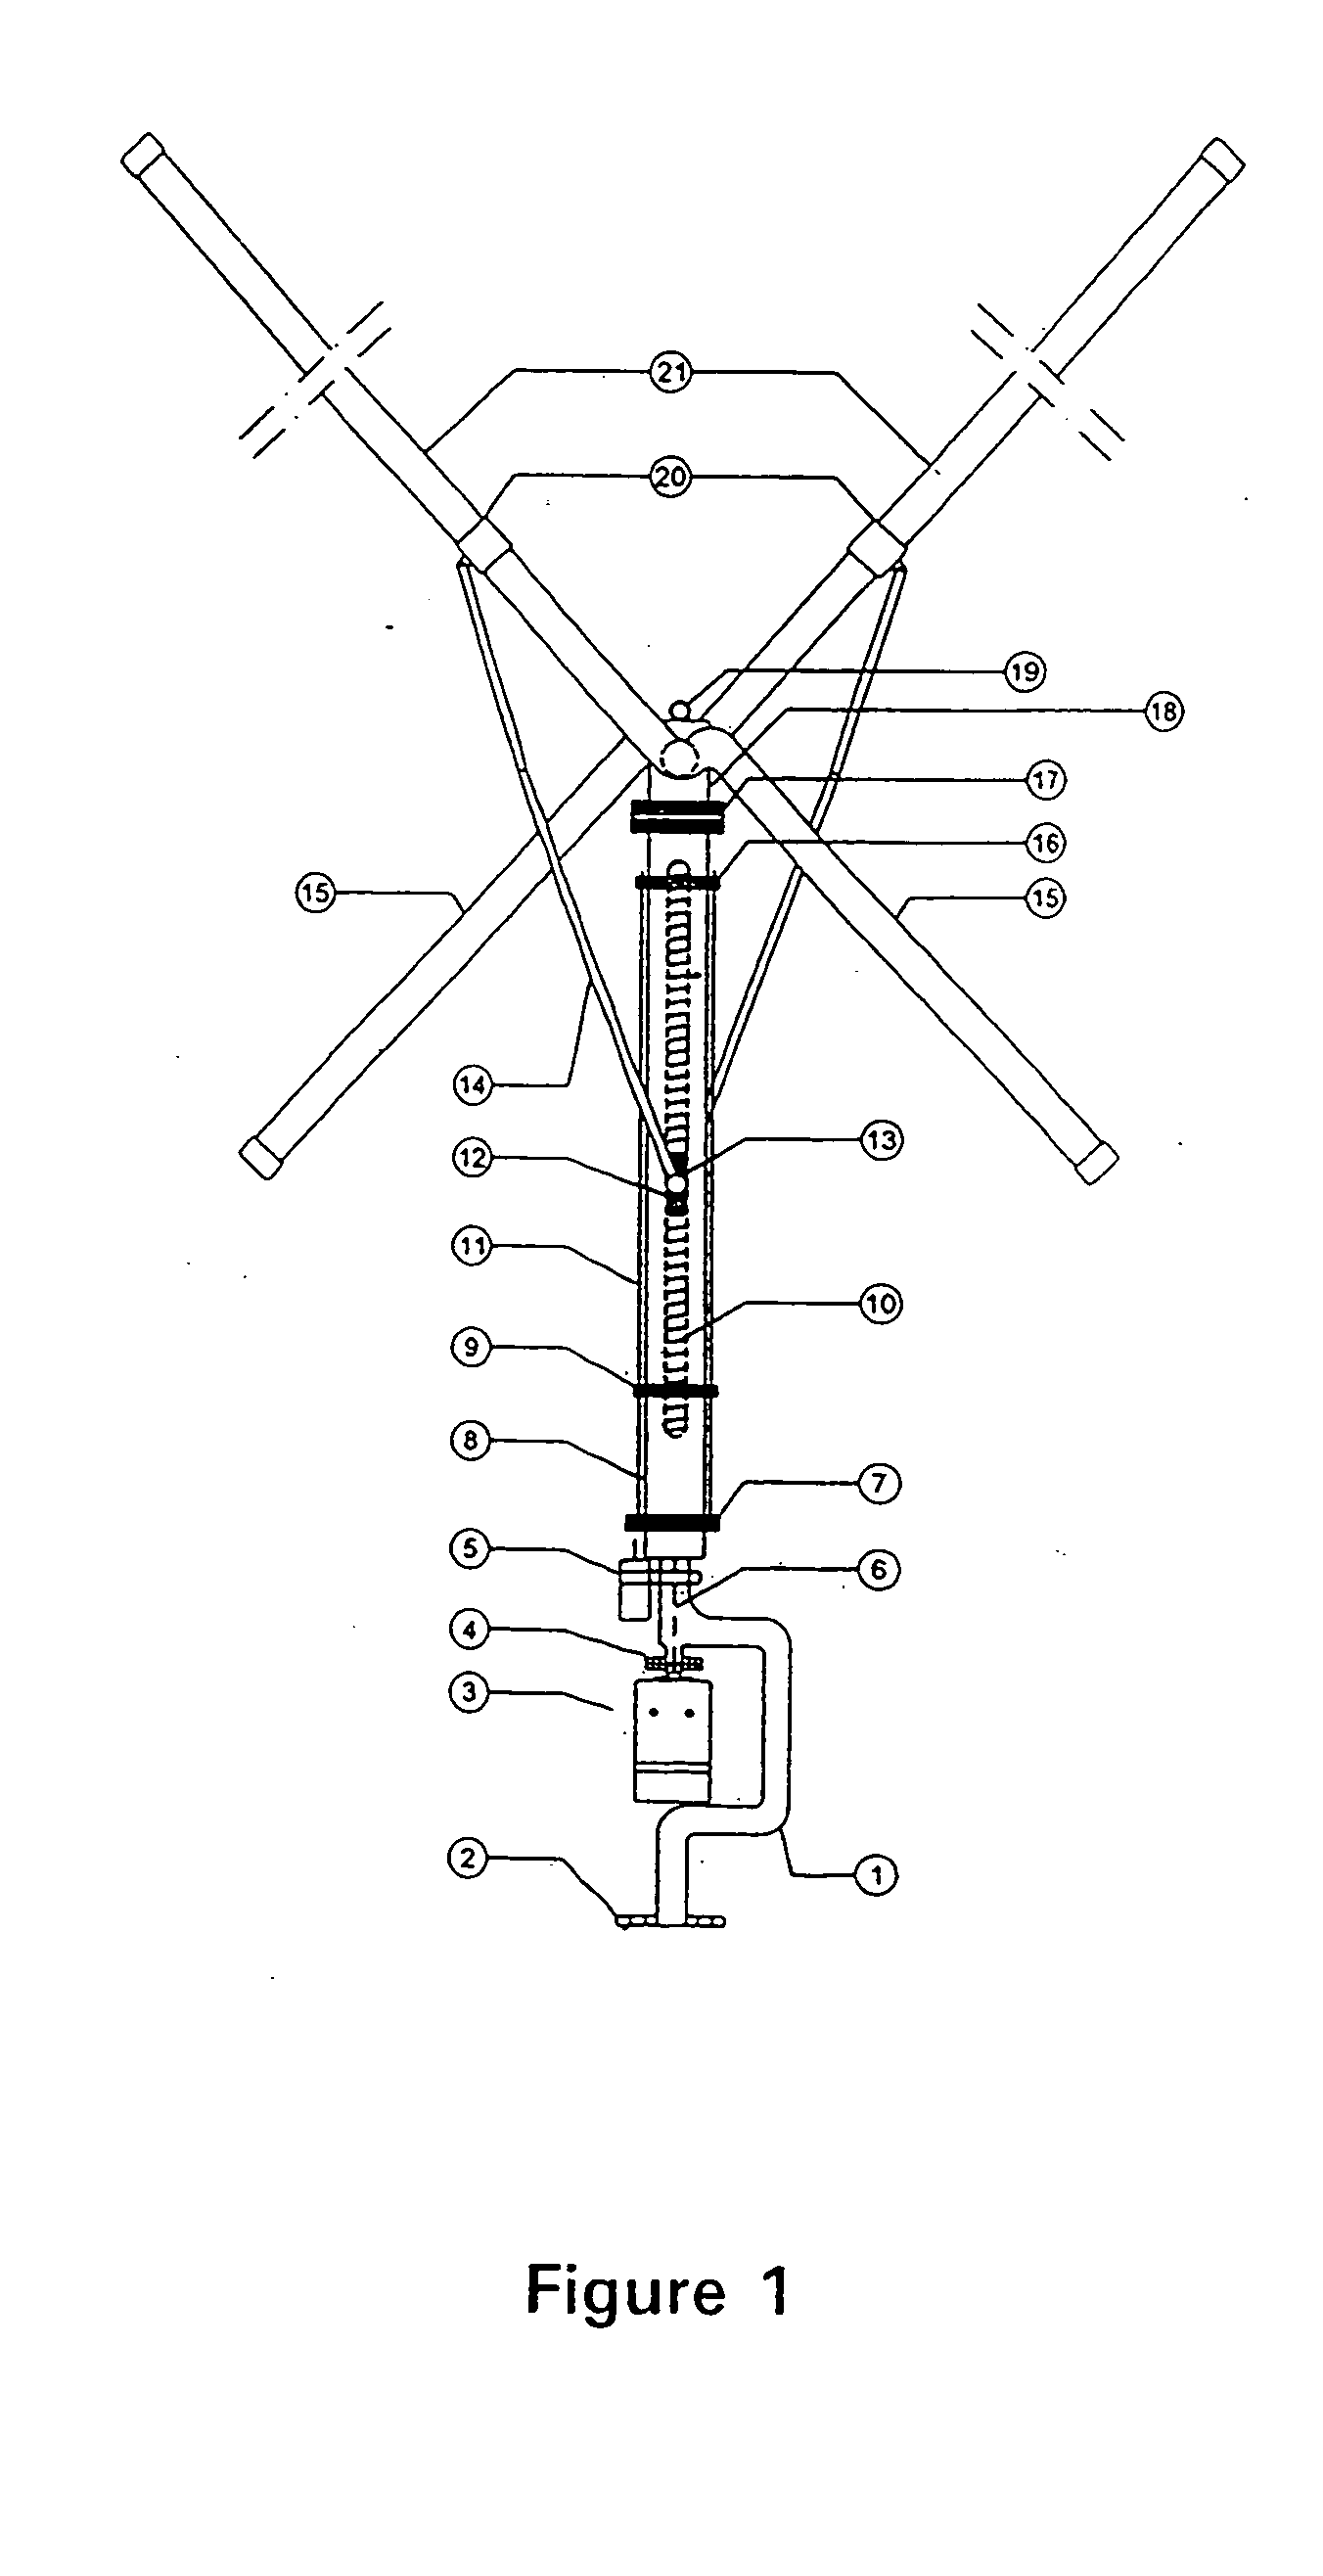 Apparatus and a method for cleaning enclosed spaces